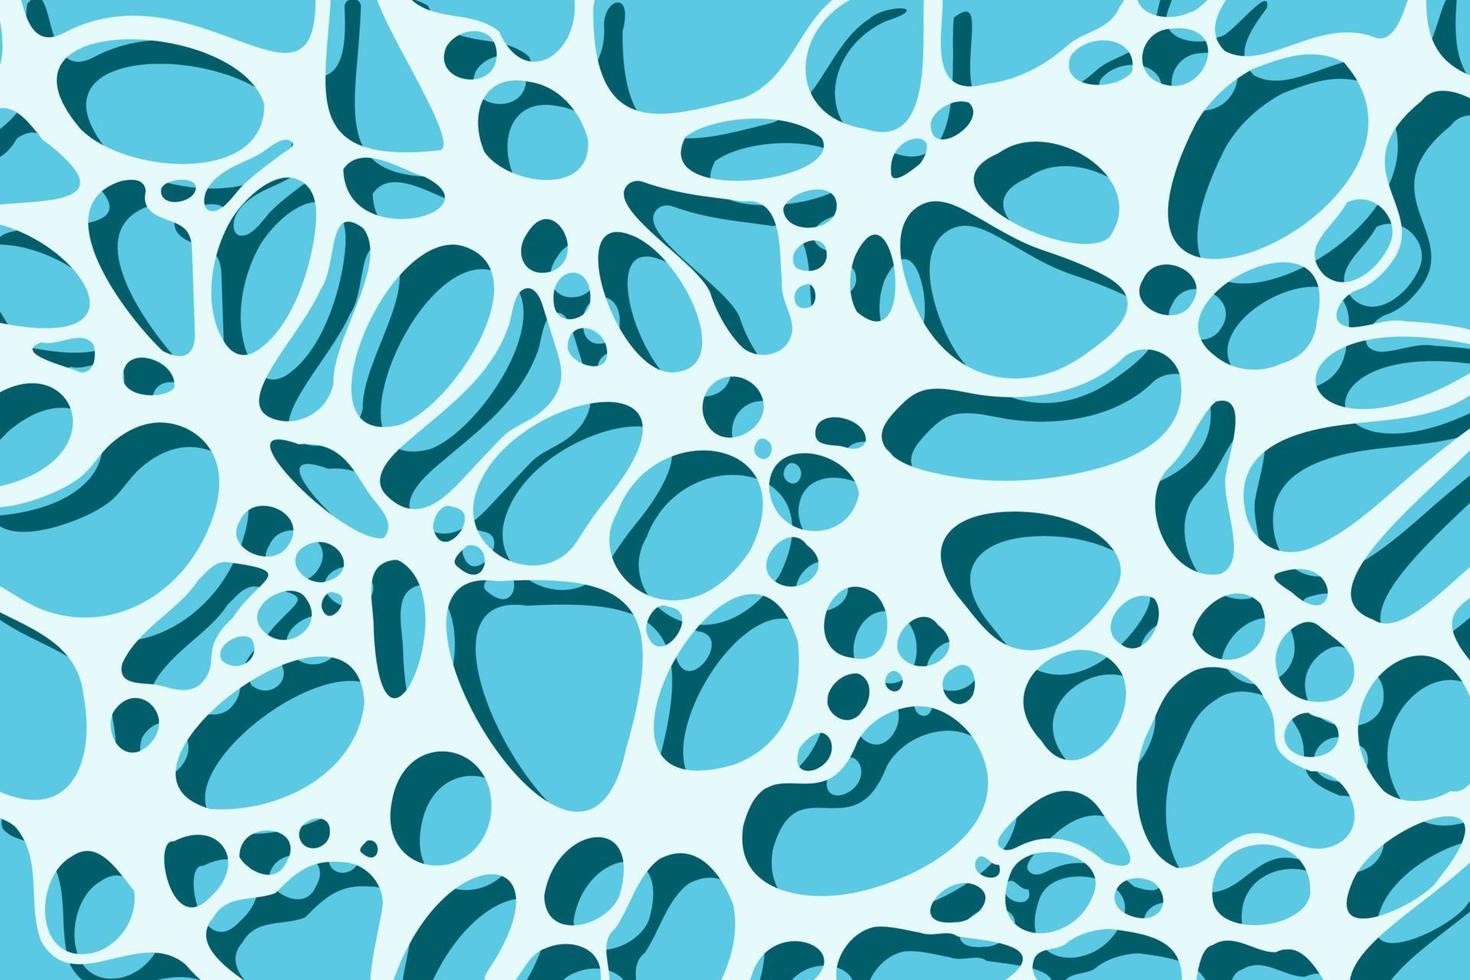 Shining blue water ripple pool abstract vector background. Vector ocean water texture